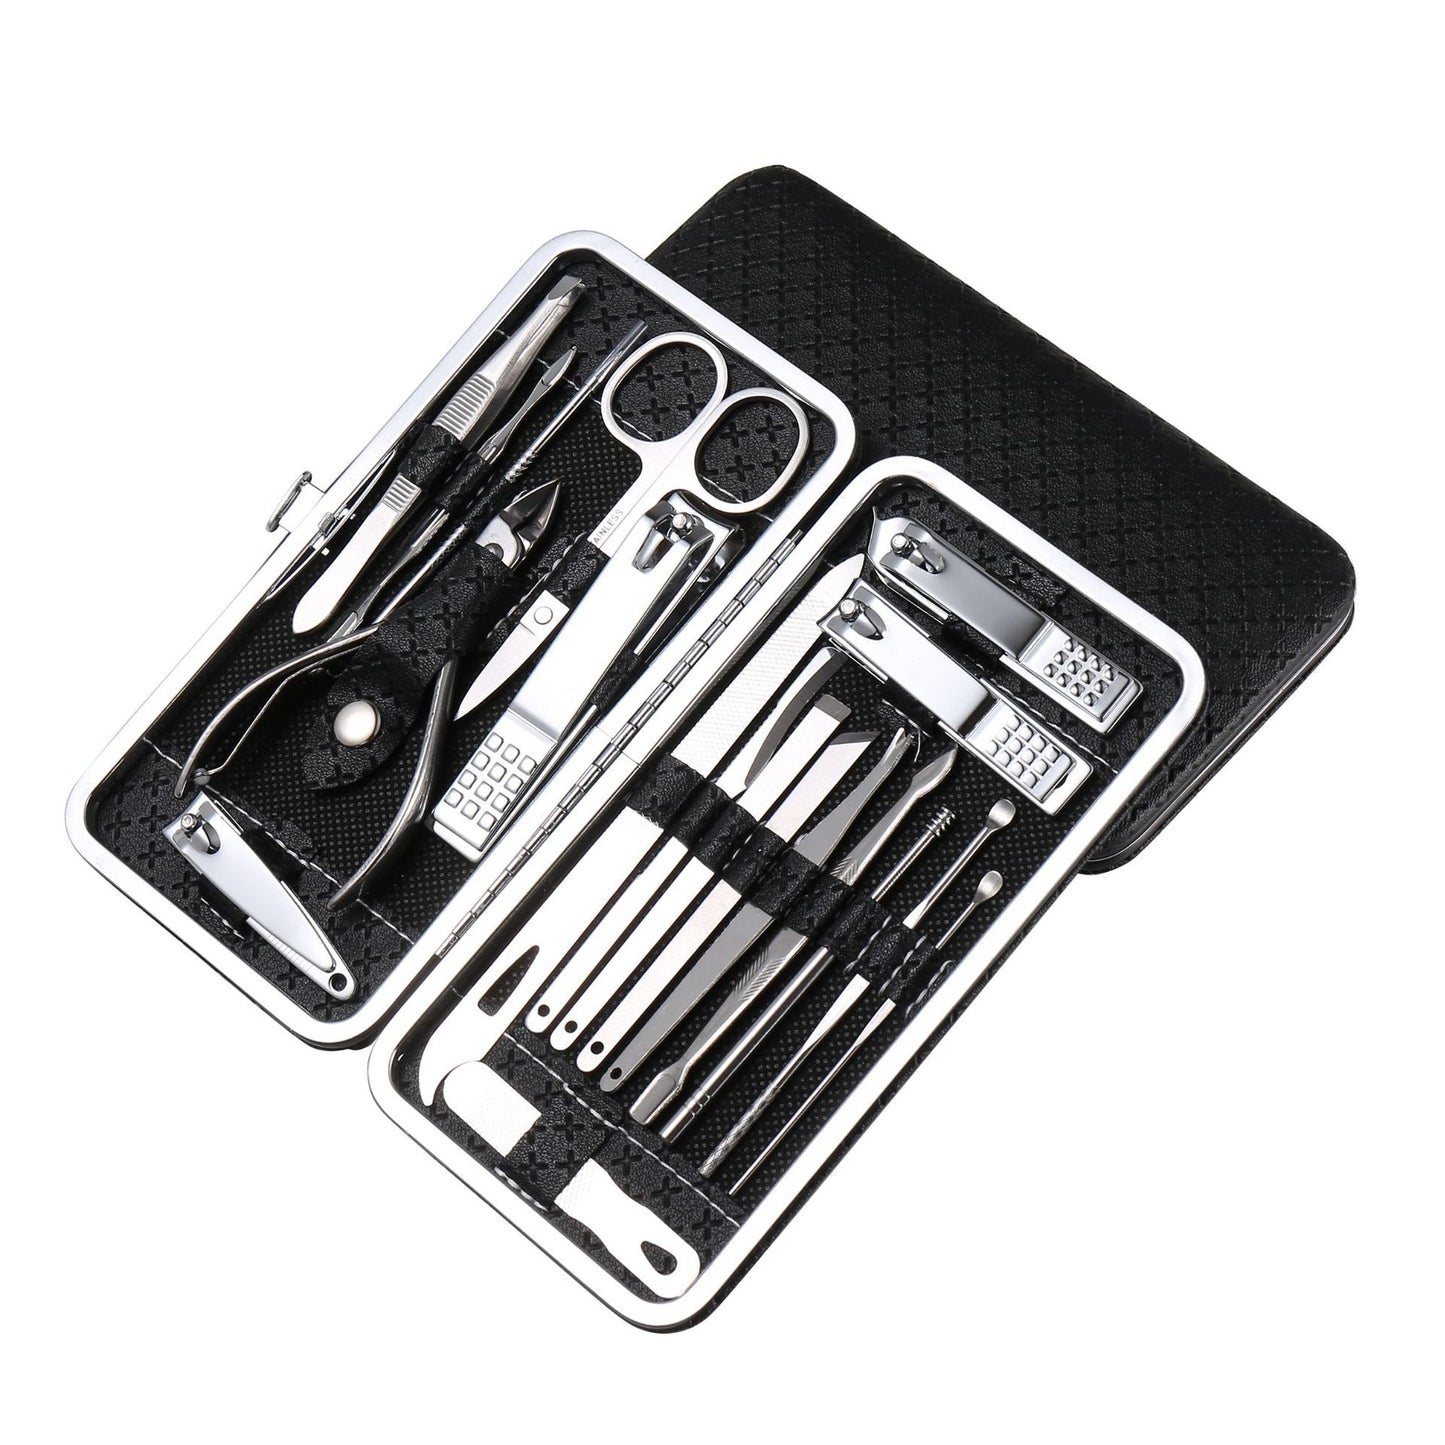 Stainless Steel Nail Clipper Cutter Trimmer, grooming, Manicure, Pedicure Set - T4x Quadruple Love